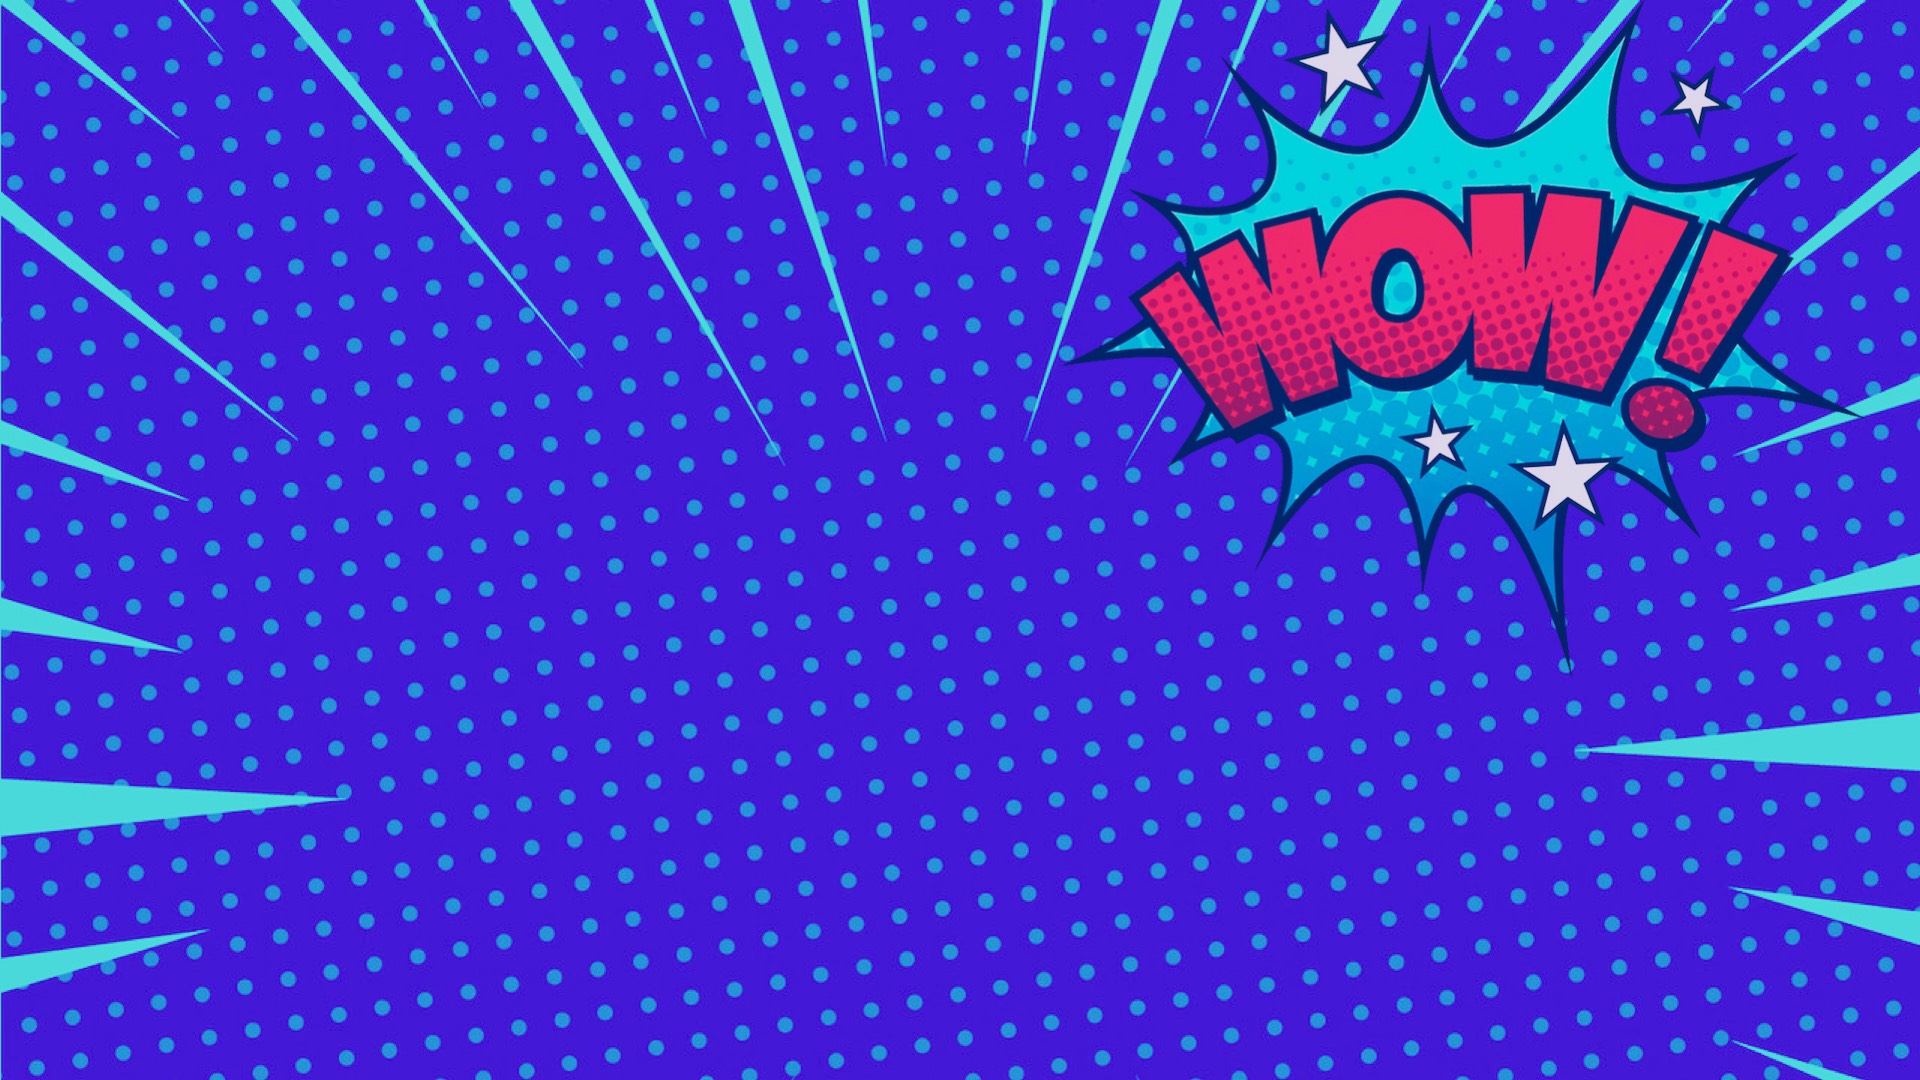 The Word Wow On A Blue Background With Stars Zoom Backgrounds Template